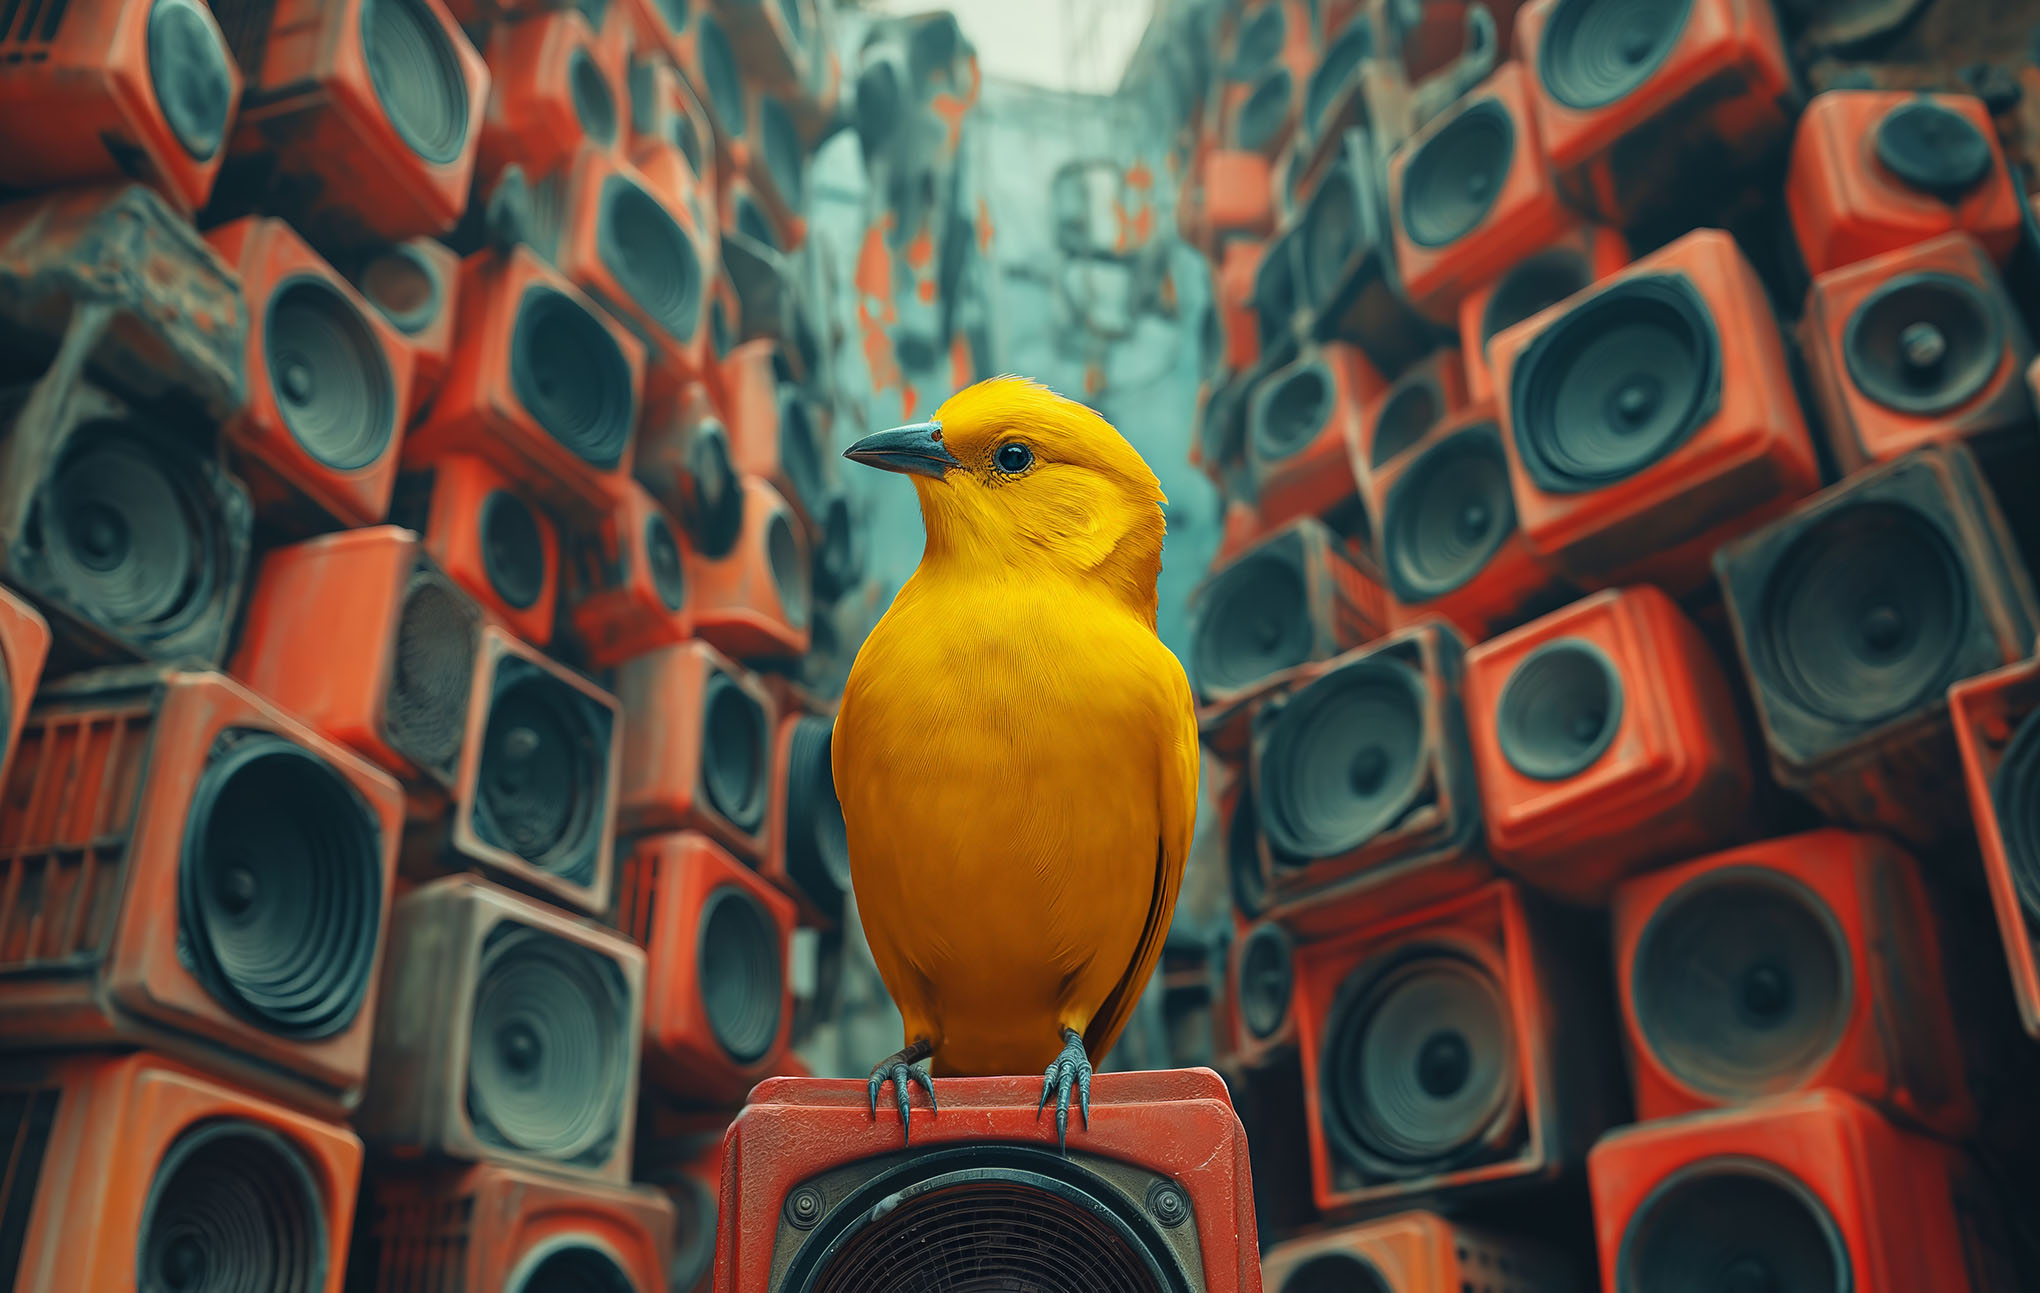 A vibrant yellow bird perched on a red speaker amidst a wall of stacked speakers in varying shades of orange and red, set against a muted, foggy cityscape background.